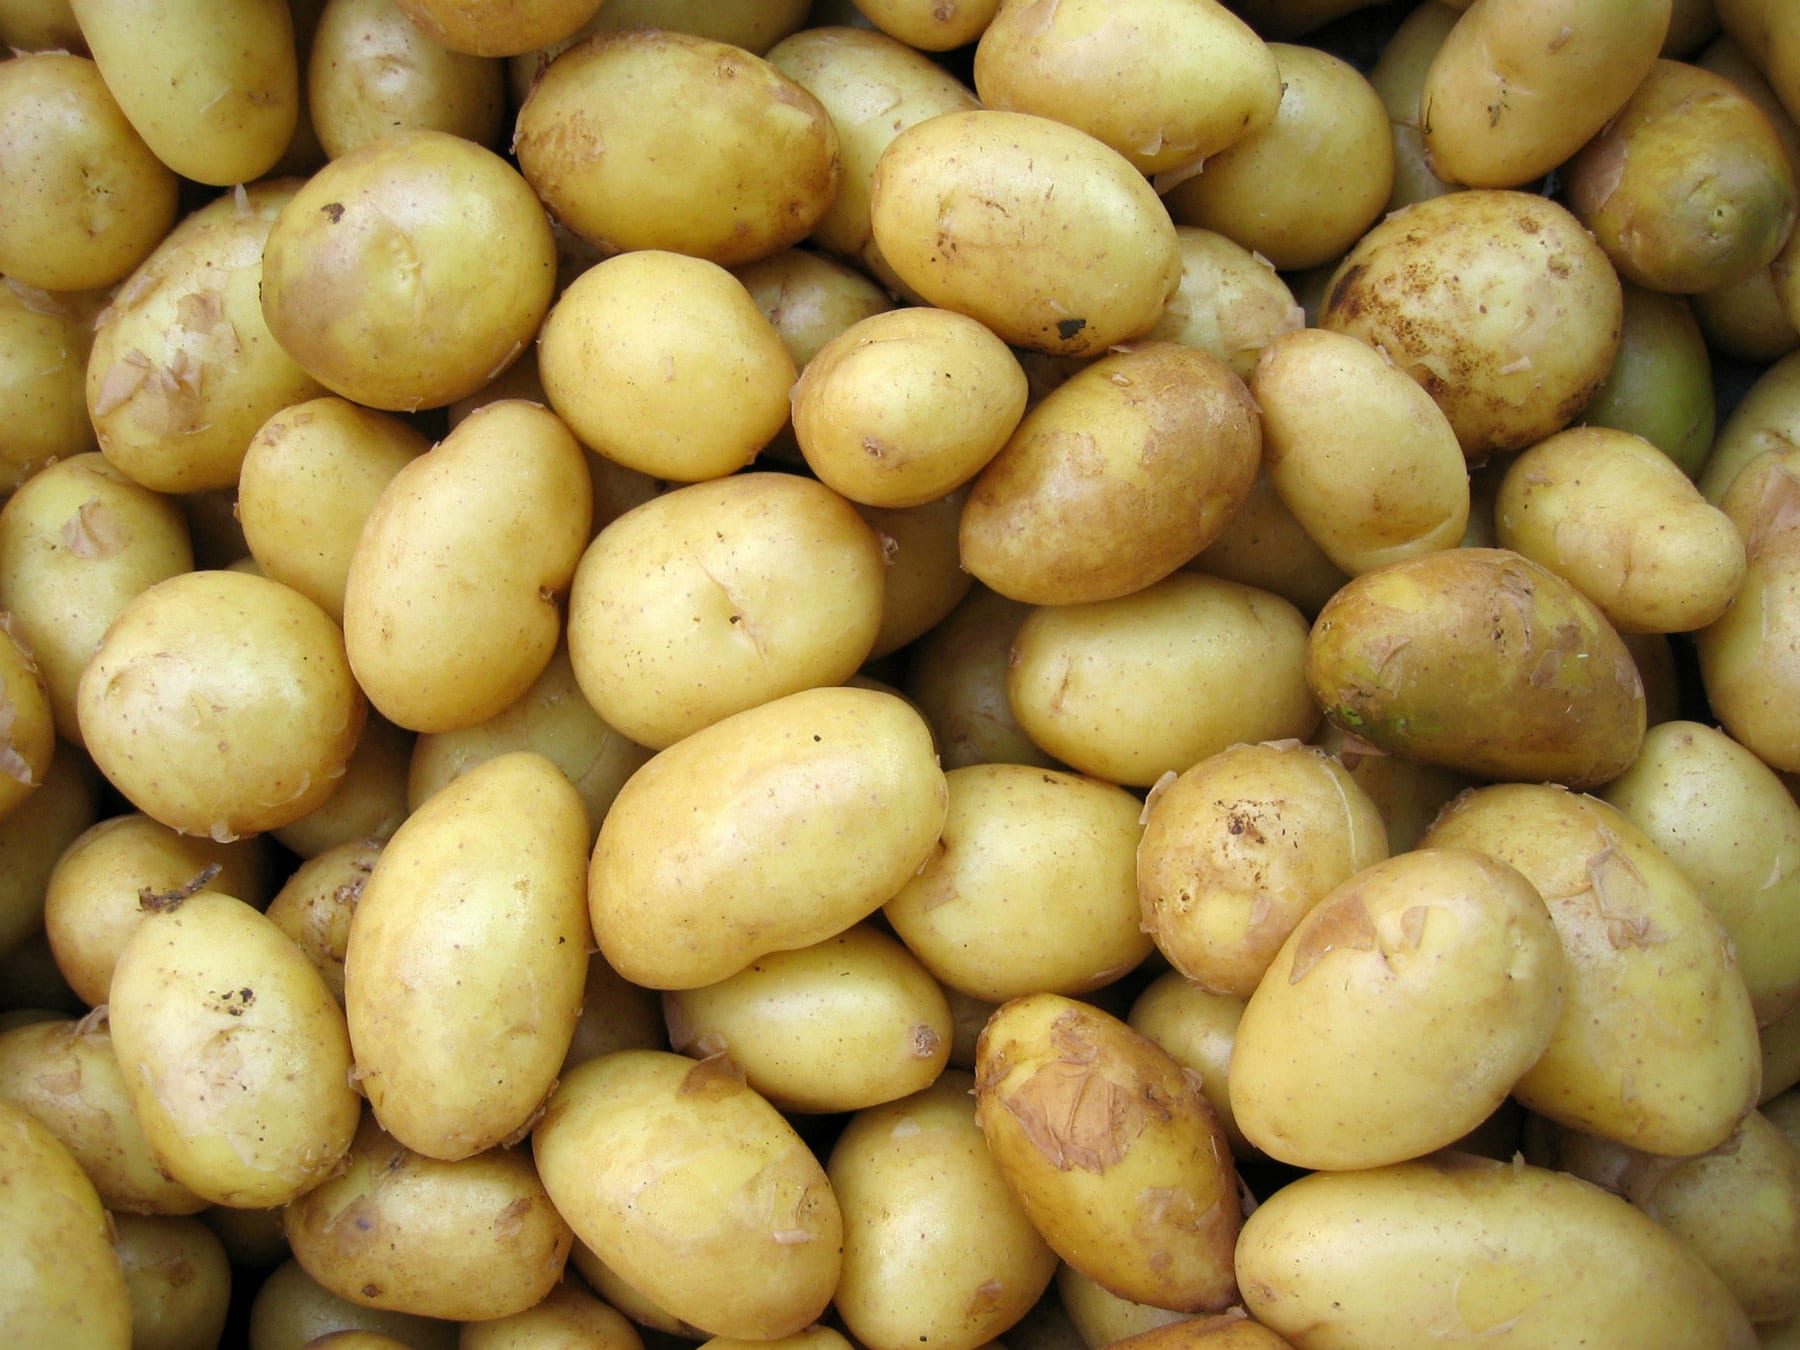 Are Potatoes Good For You | Nutrition & Benefits